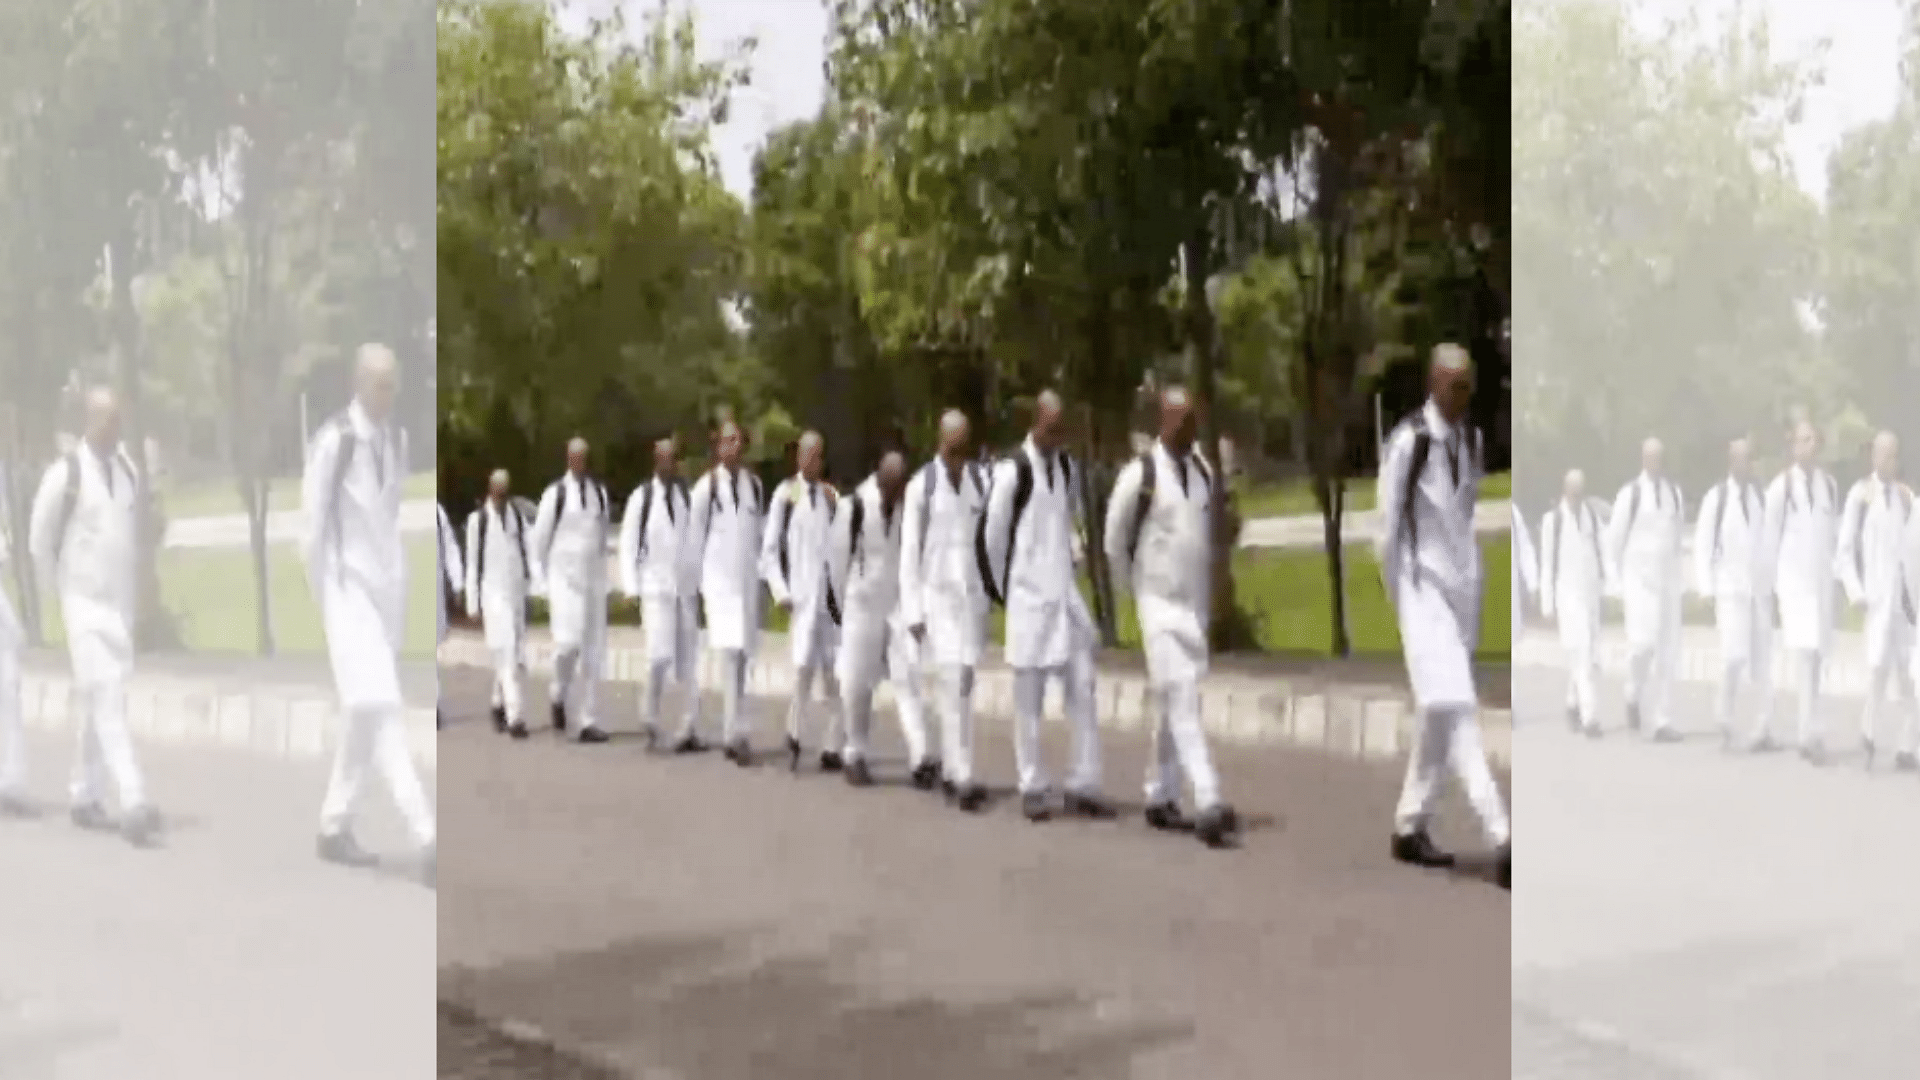 MBBS Students in Saifai Medical College were forced to shave their heads